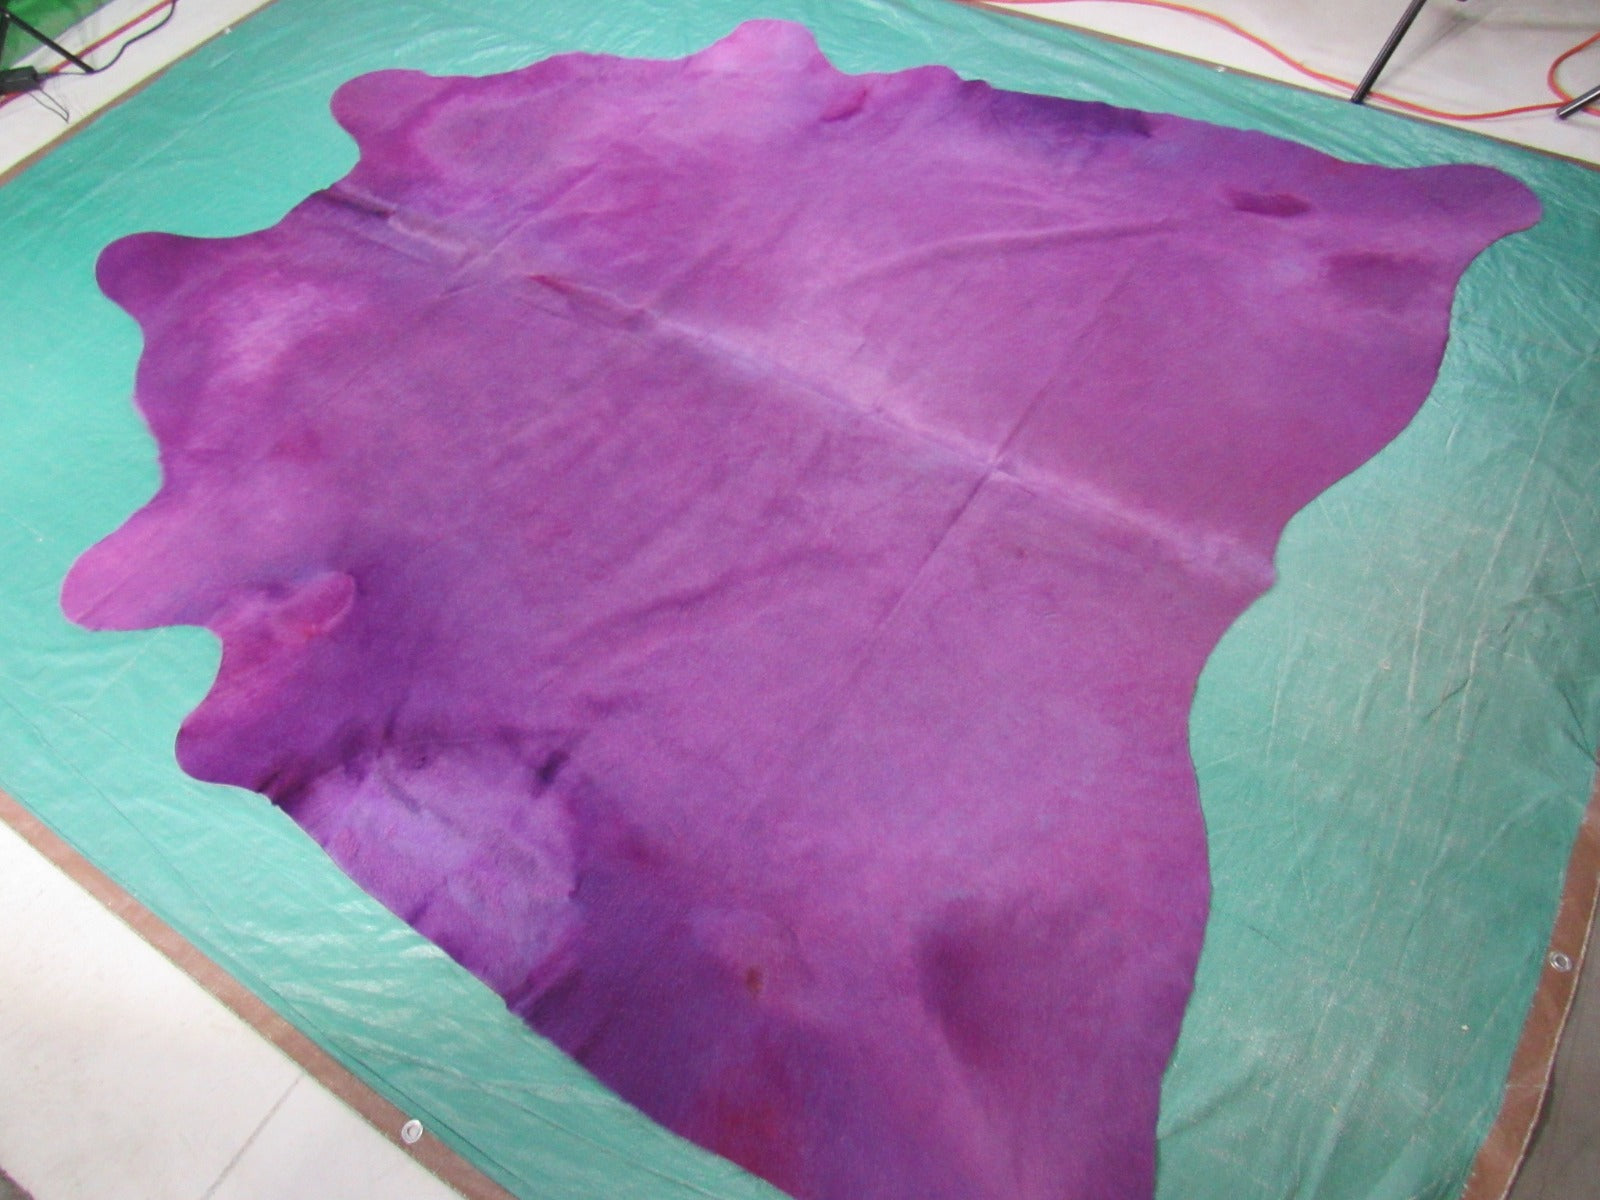 Dyed Purple Cowhide Rug - Size: 7' x 7' C-1052